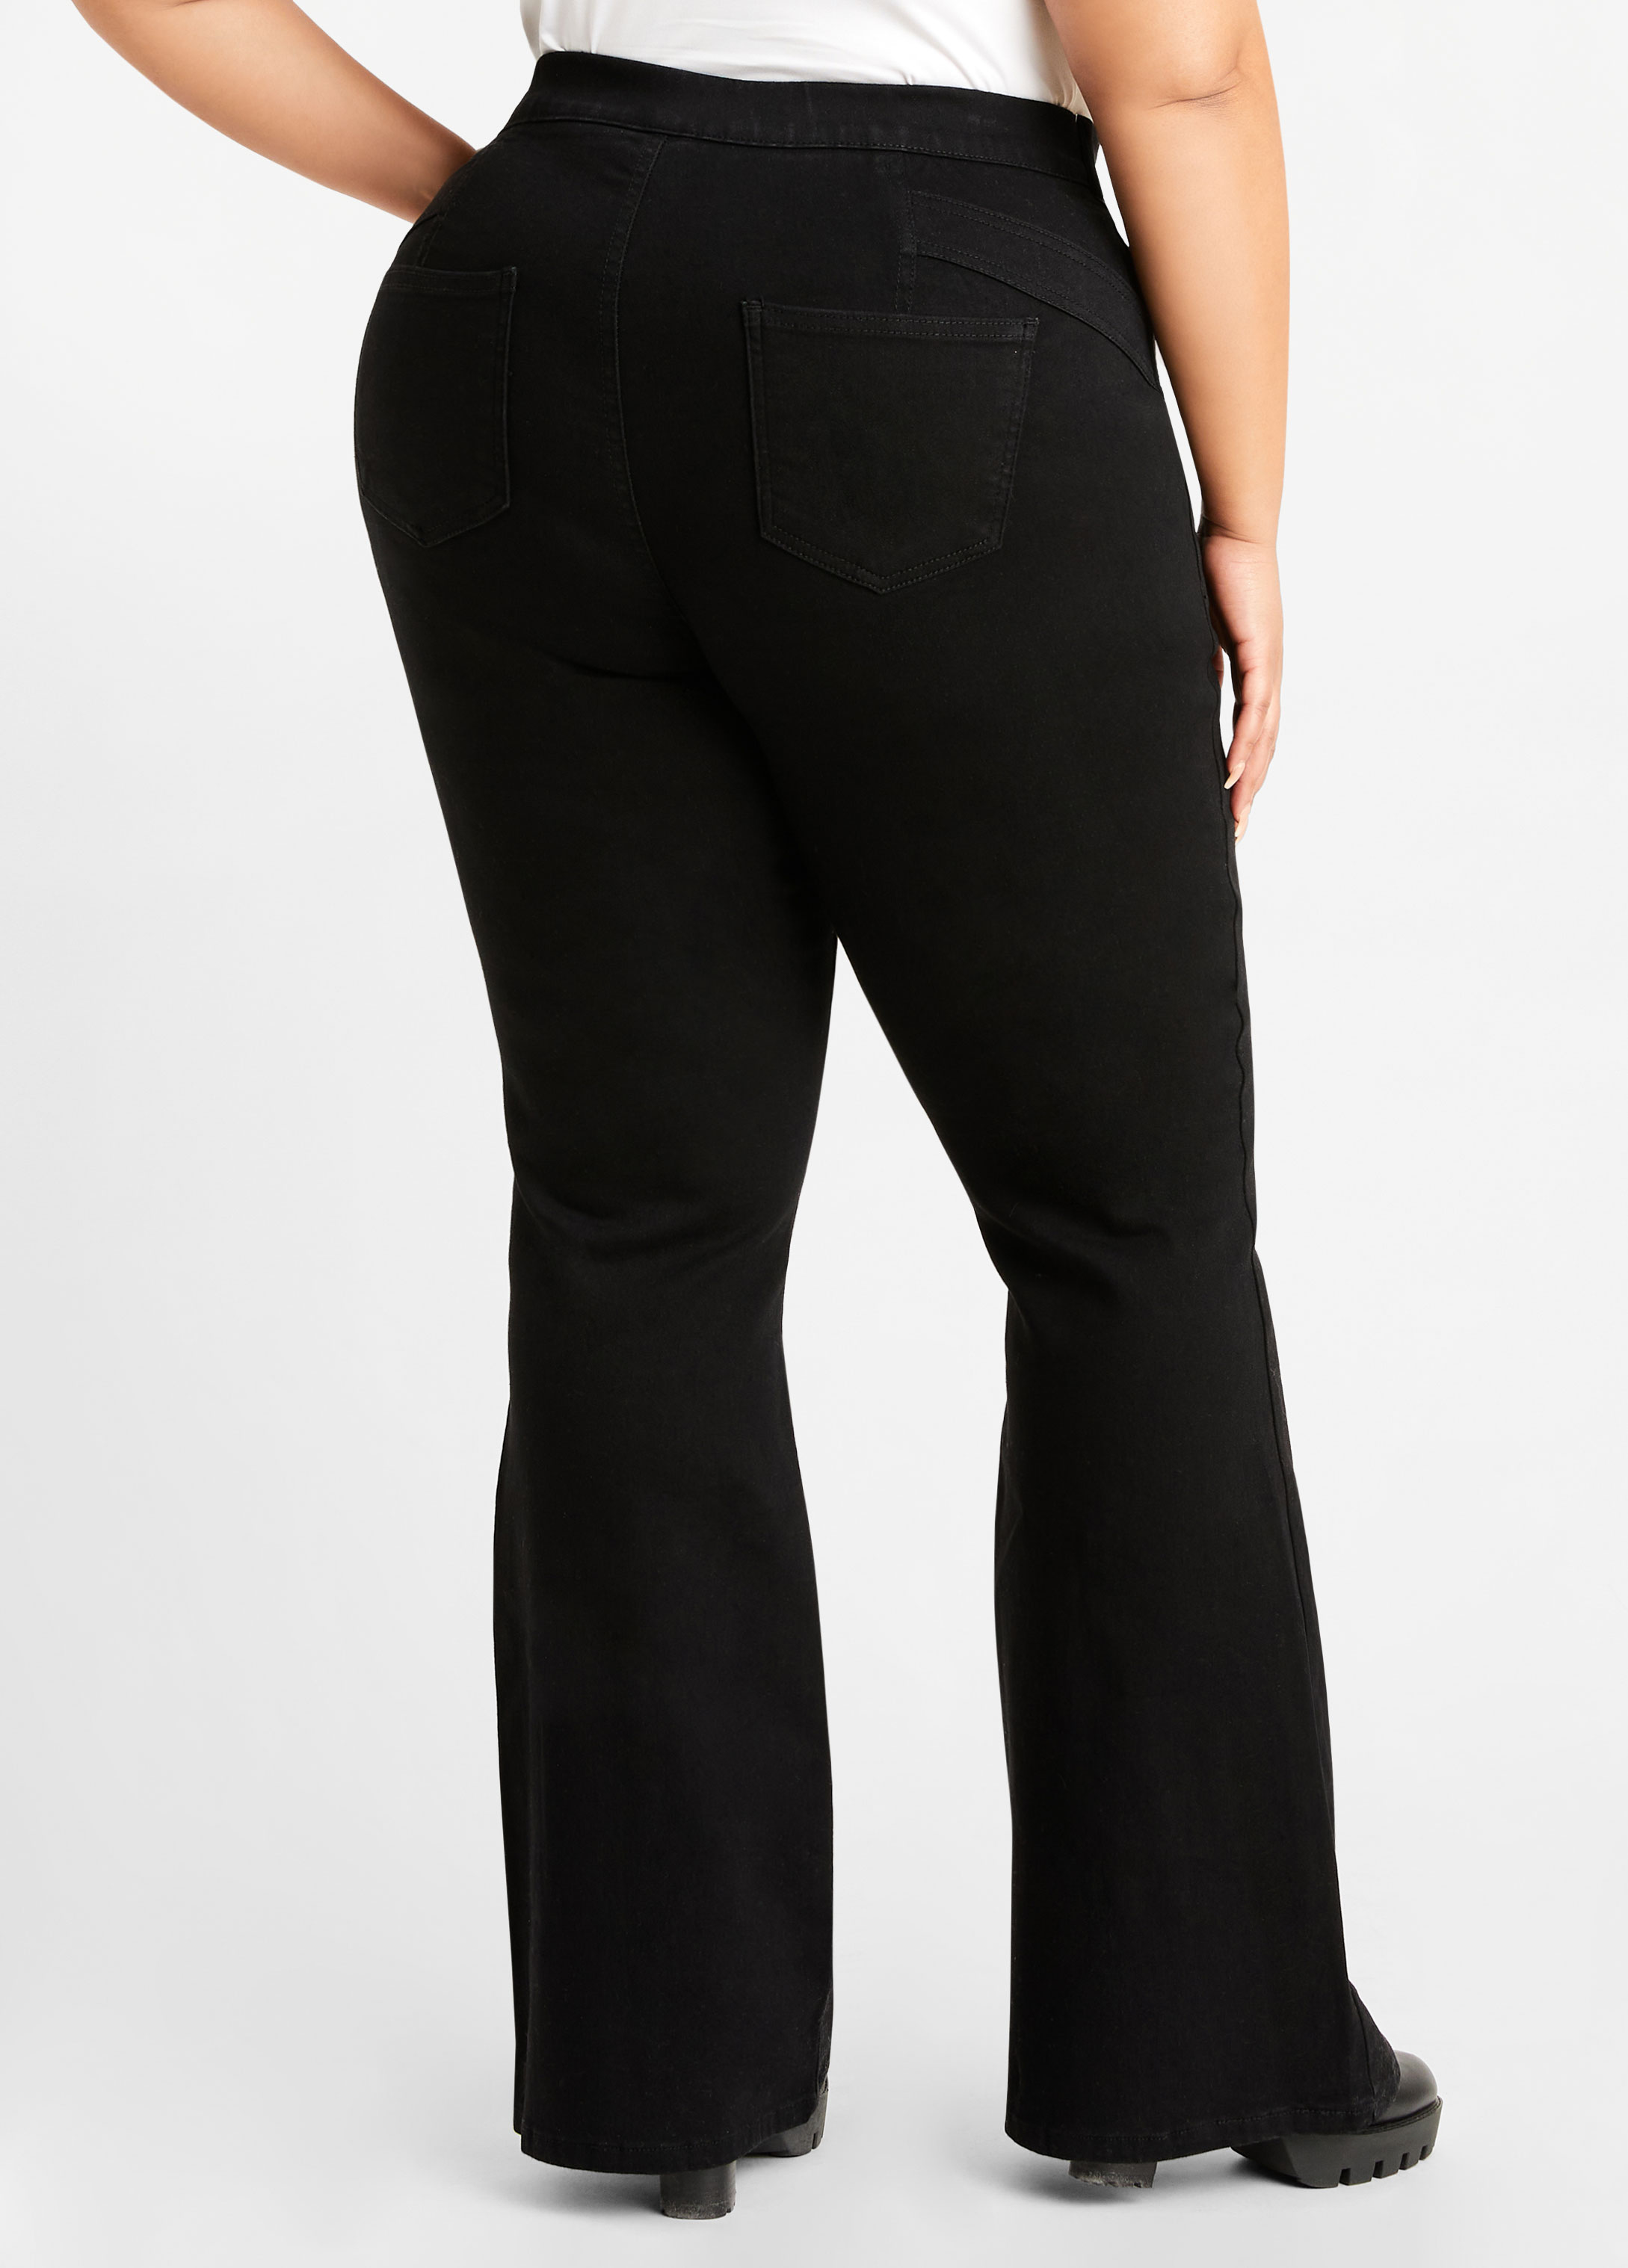 ShopWonder Plus Size Dress Pants for Women Stretch Pull On Flare